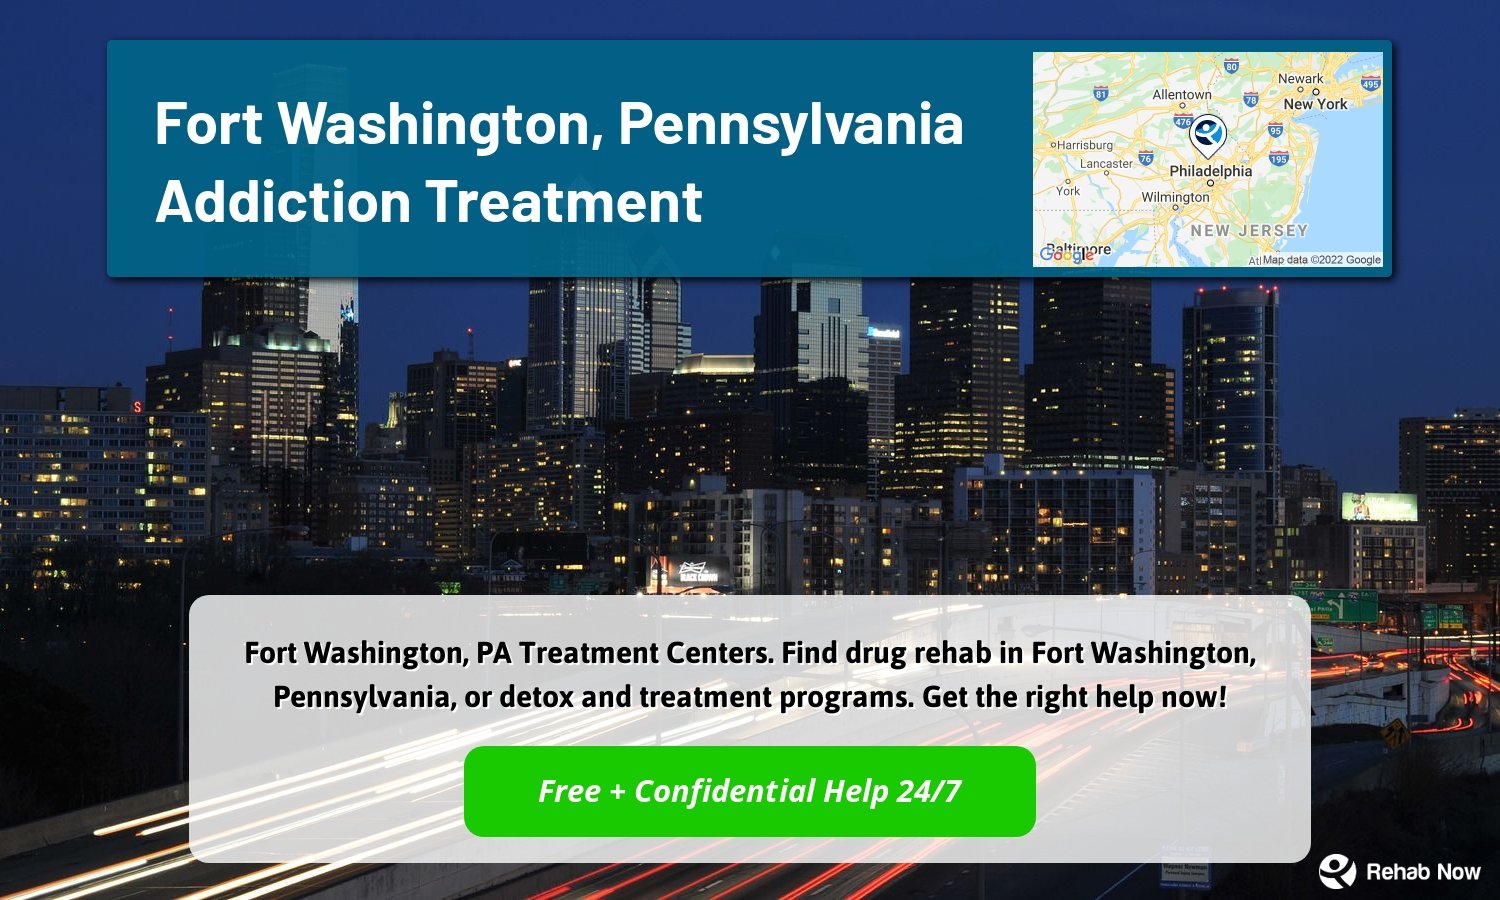 Fort Washington, PA Treatment Centers. Find drug rehab in Fort Washington, Pennsylvania, or detox and treatment programs. Get the right help now!